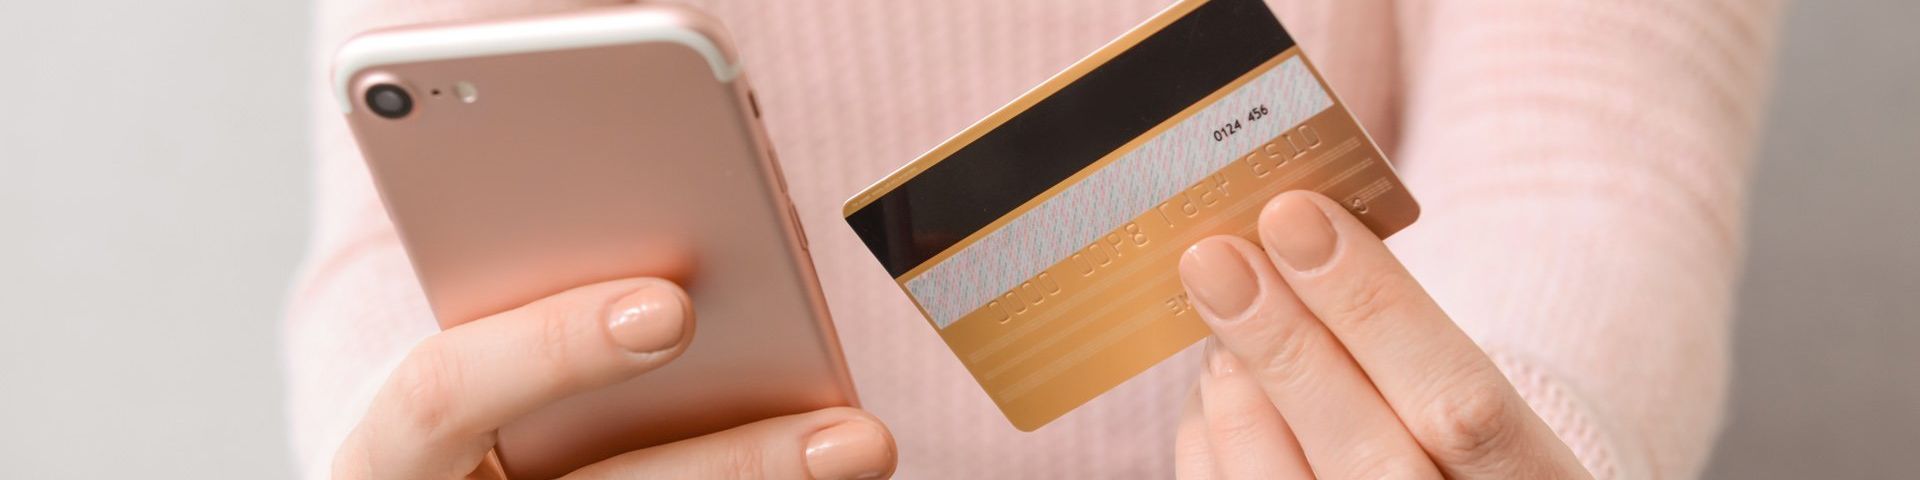 An unseen person in a pale pink sweater holds a pink smartphone in one hand and a credit card in the other.